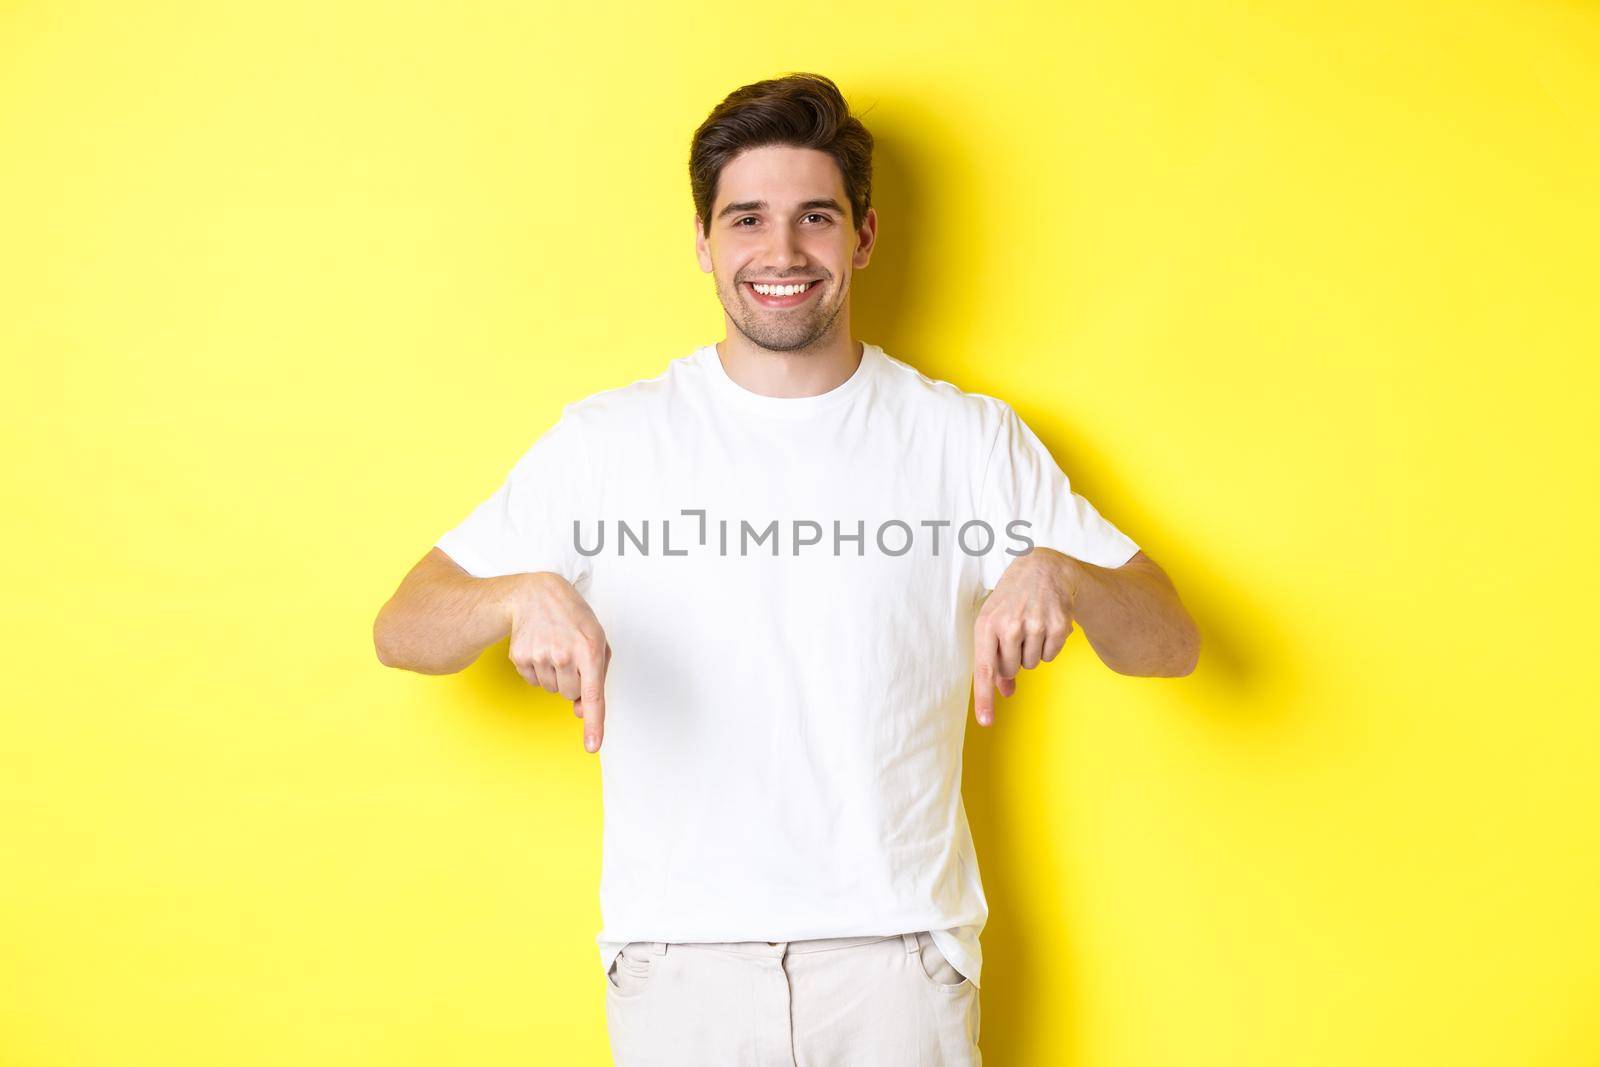 Attractive bearded man pointing fingers down, showing event banner, standing over yellow background.